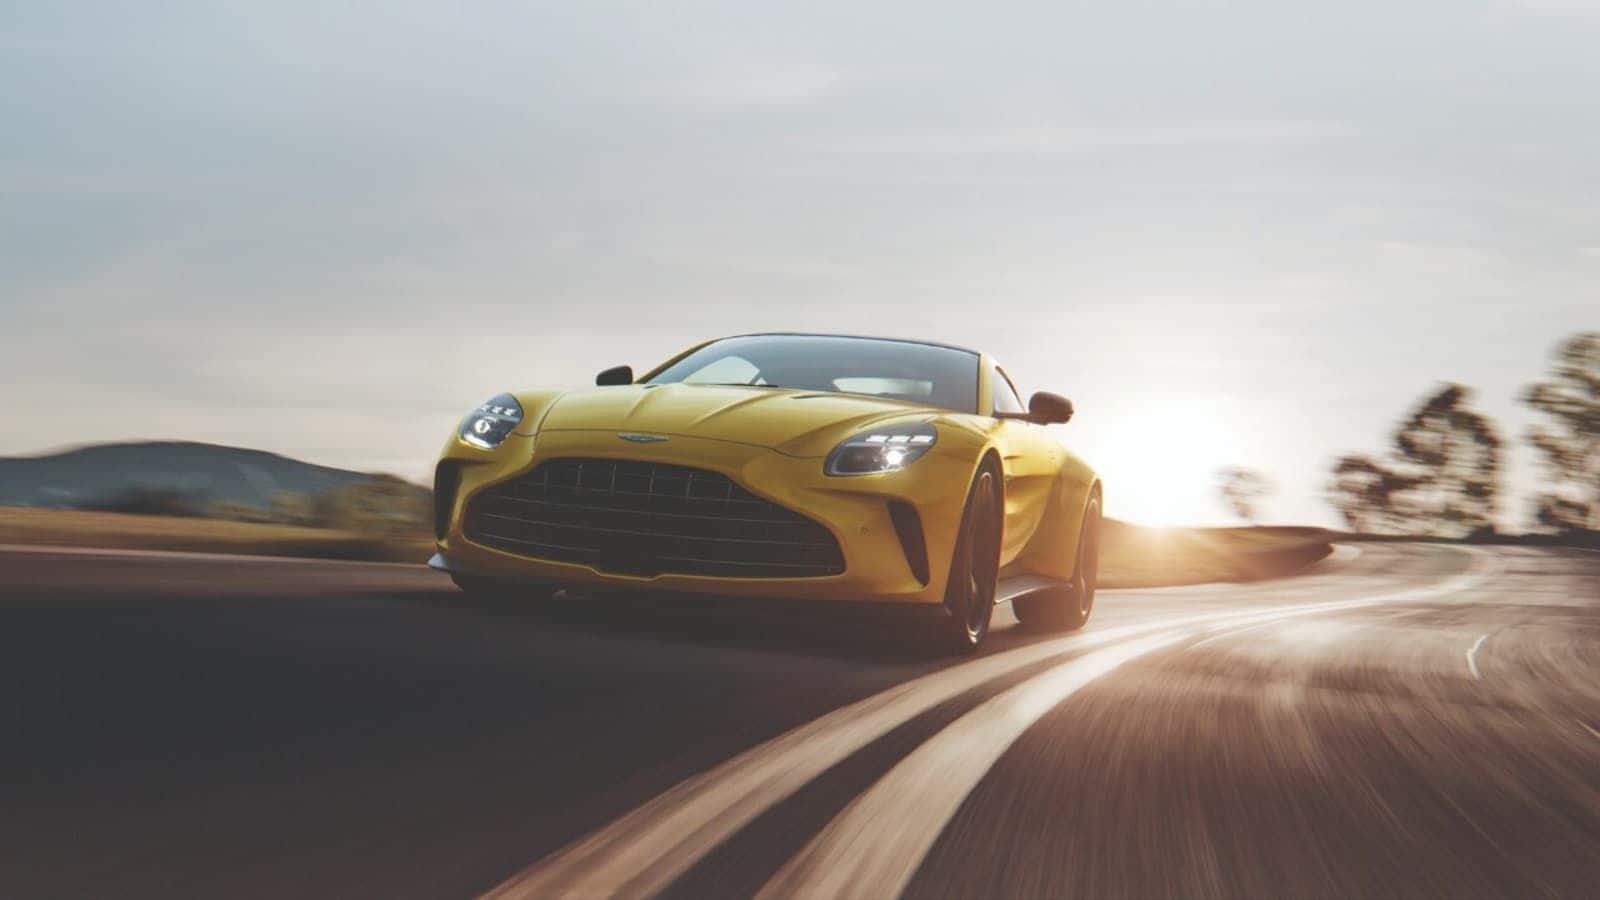 Aston Martin launches new Vantage in India at ₹4cr